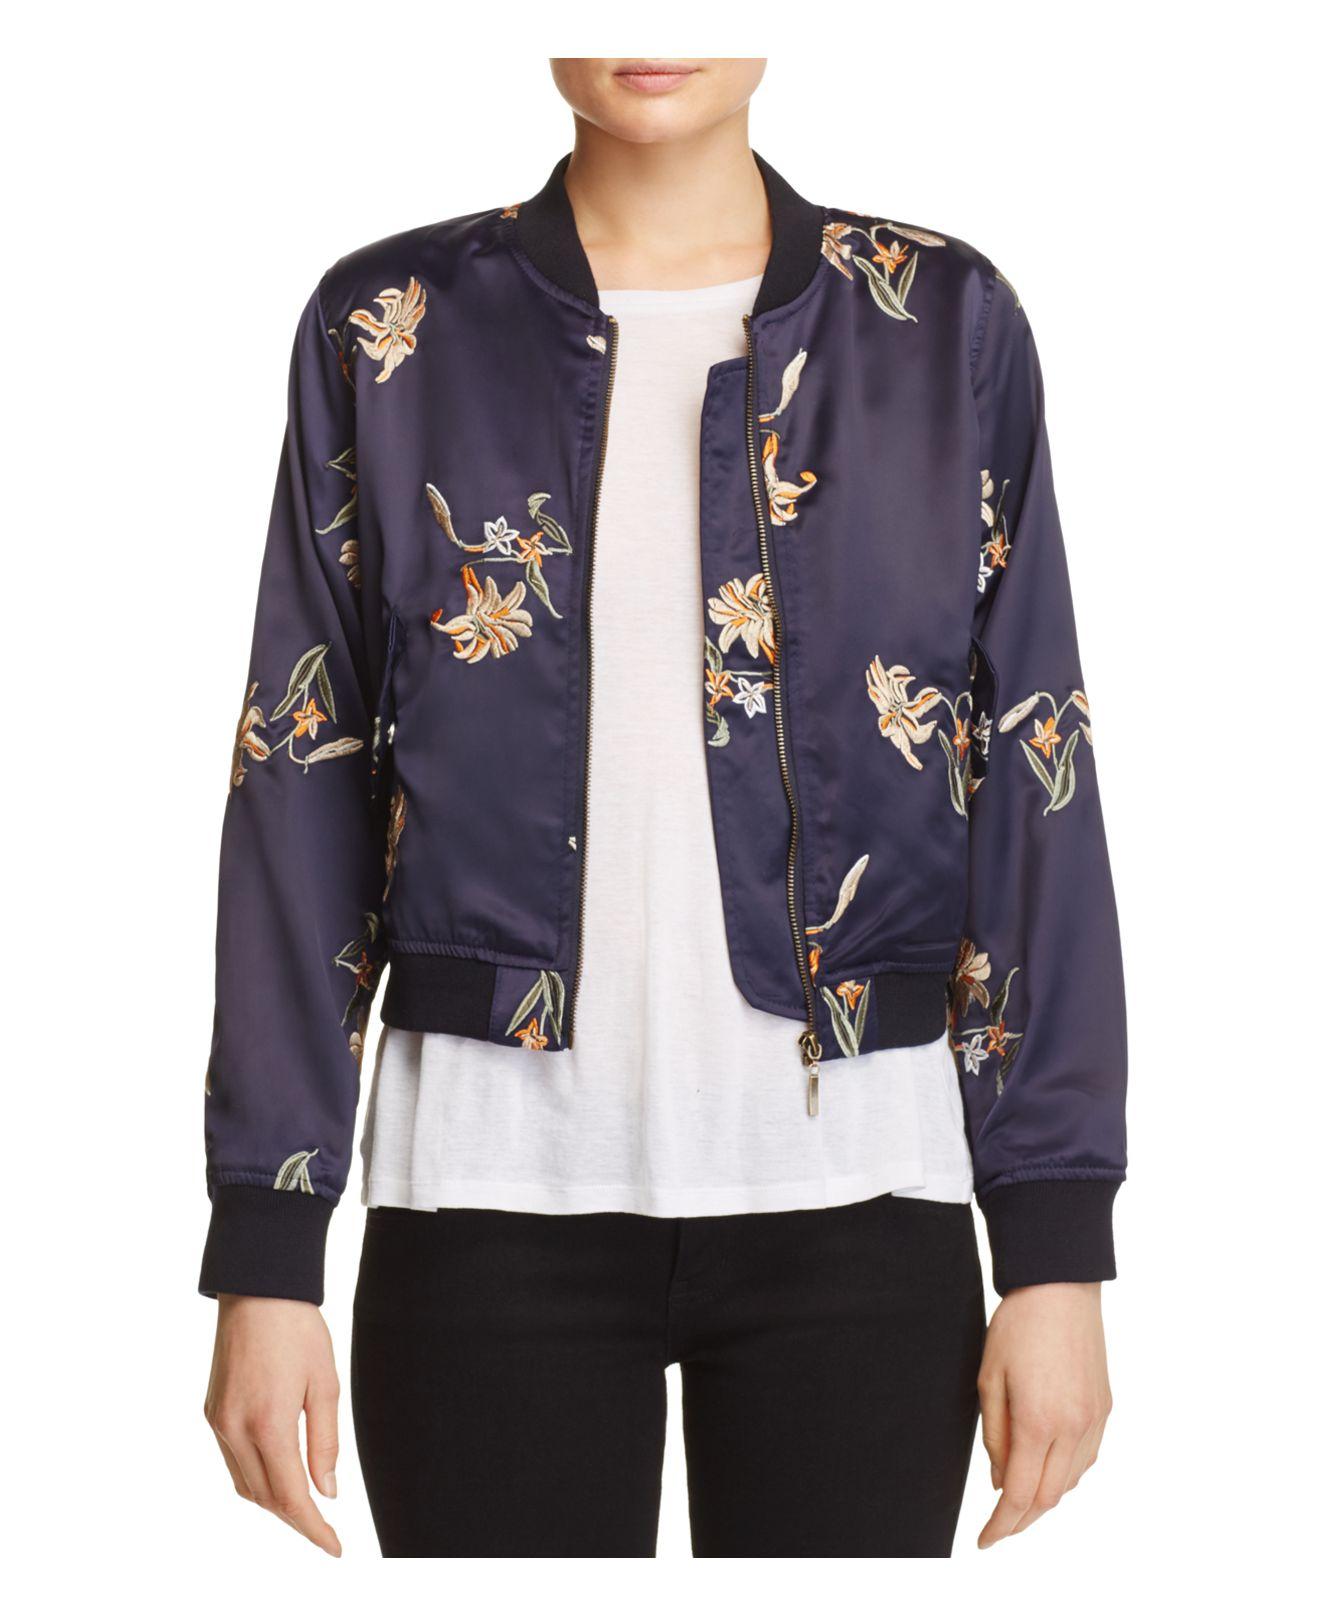 Aqua Satin Embroidered Floral Bomber Jacket in Navy (Blue) - Lyst